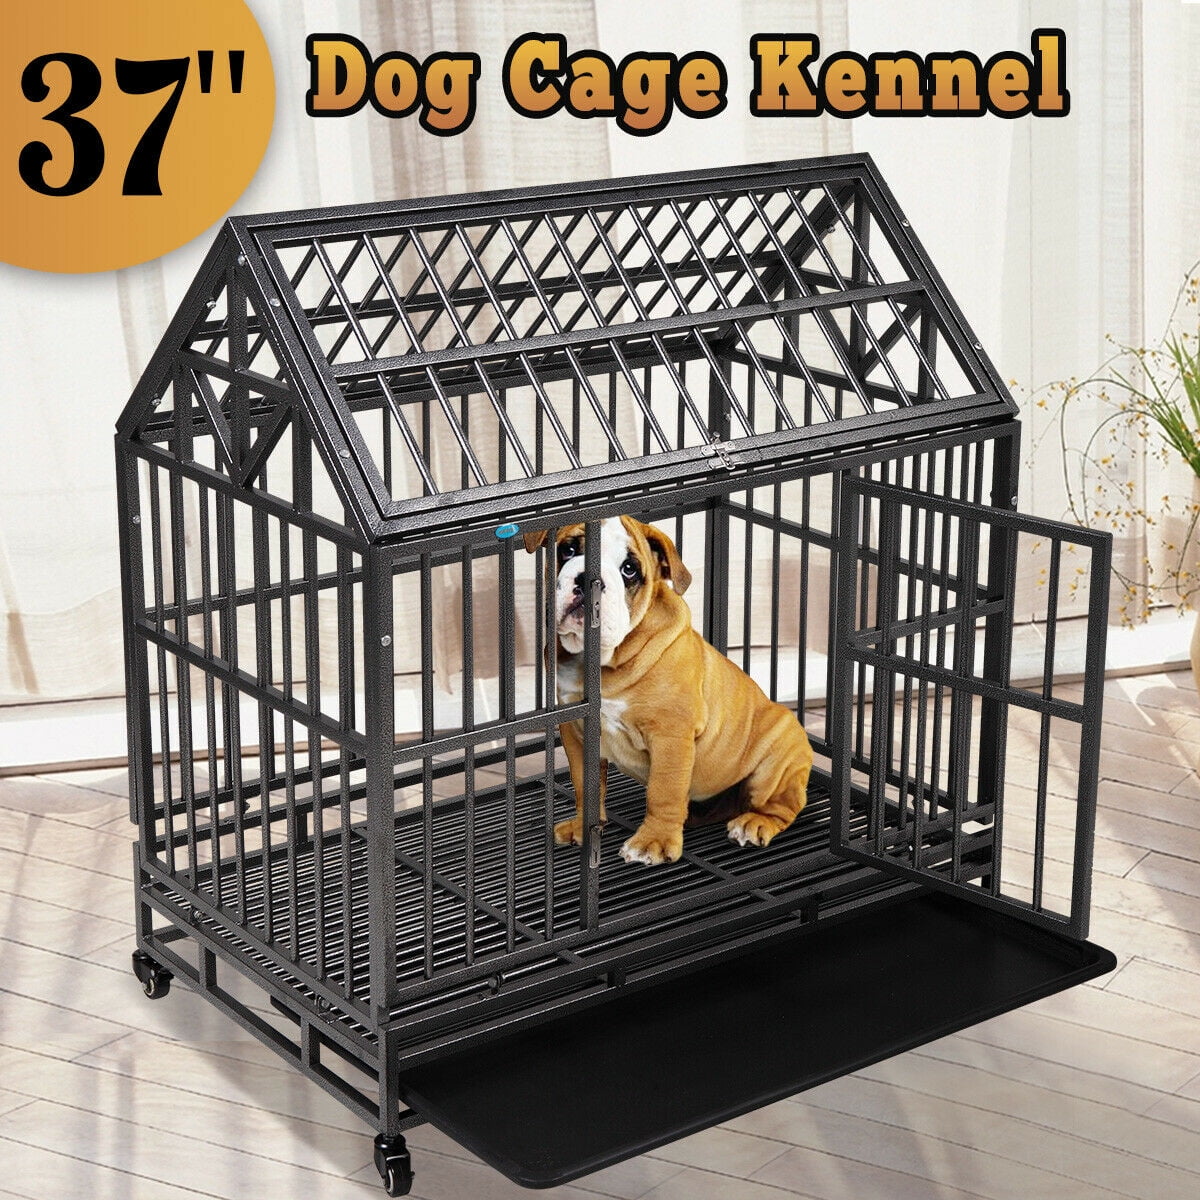 Floppy Dawg Innovative 42" Dog Crate Cover for Kennels and Wire Crates in Gray 